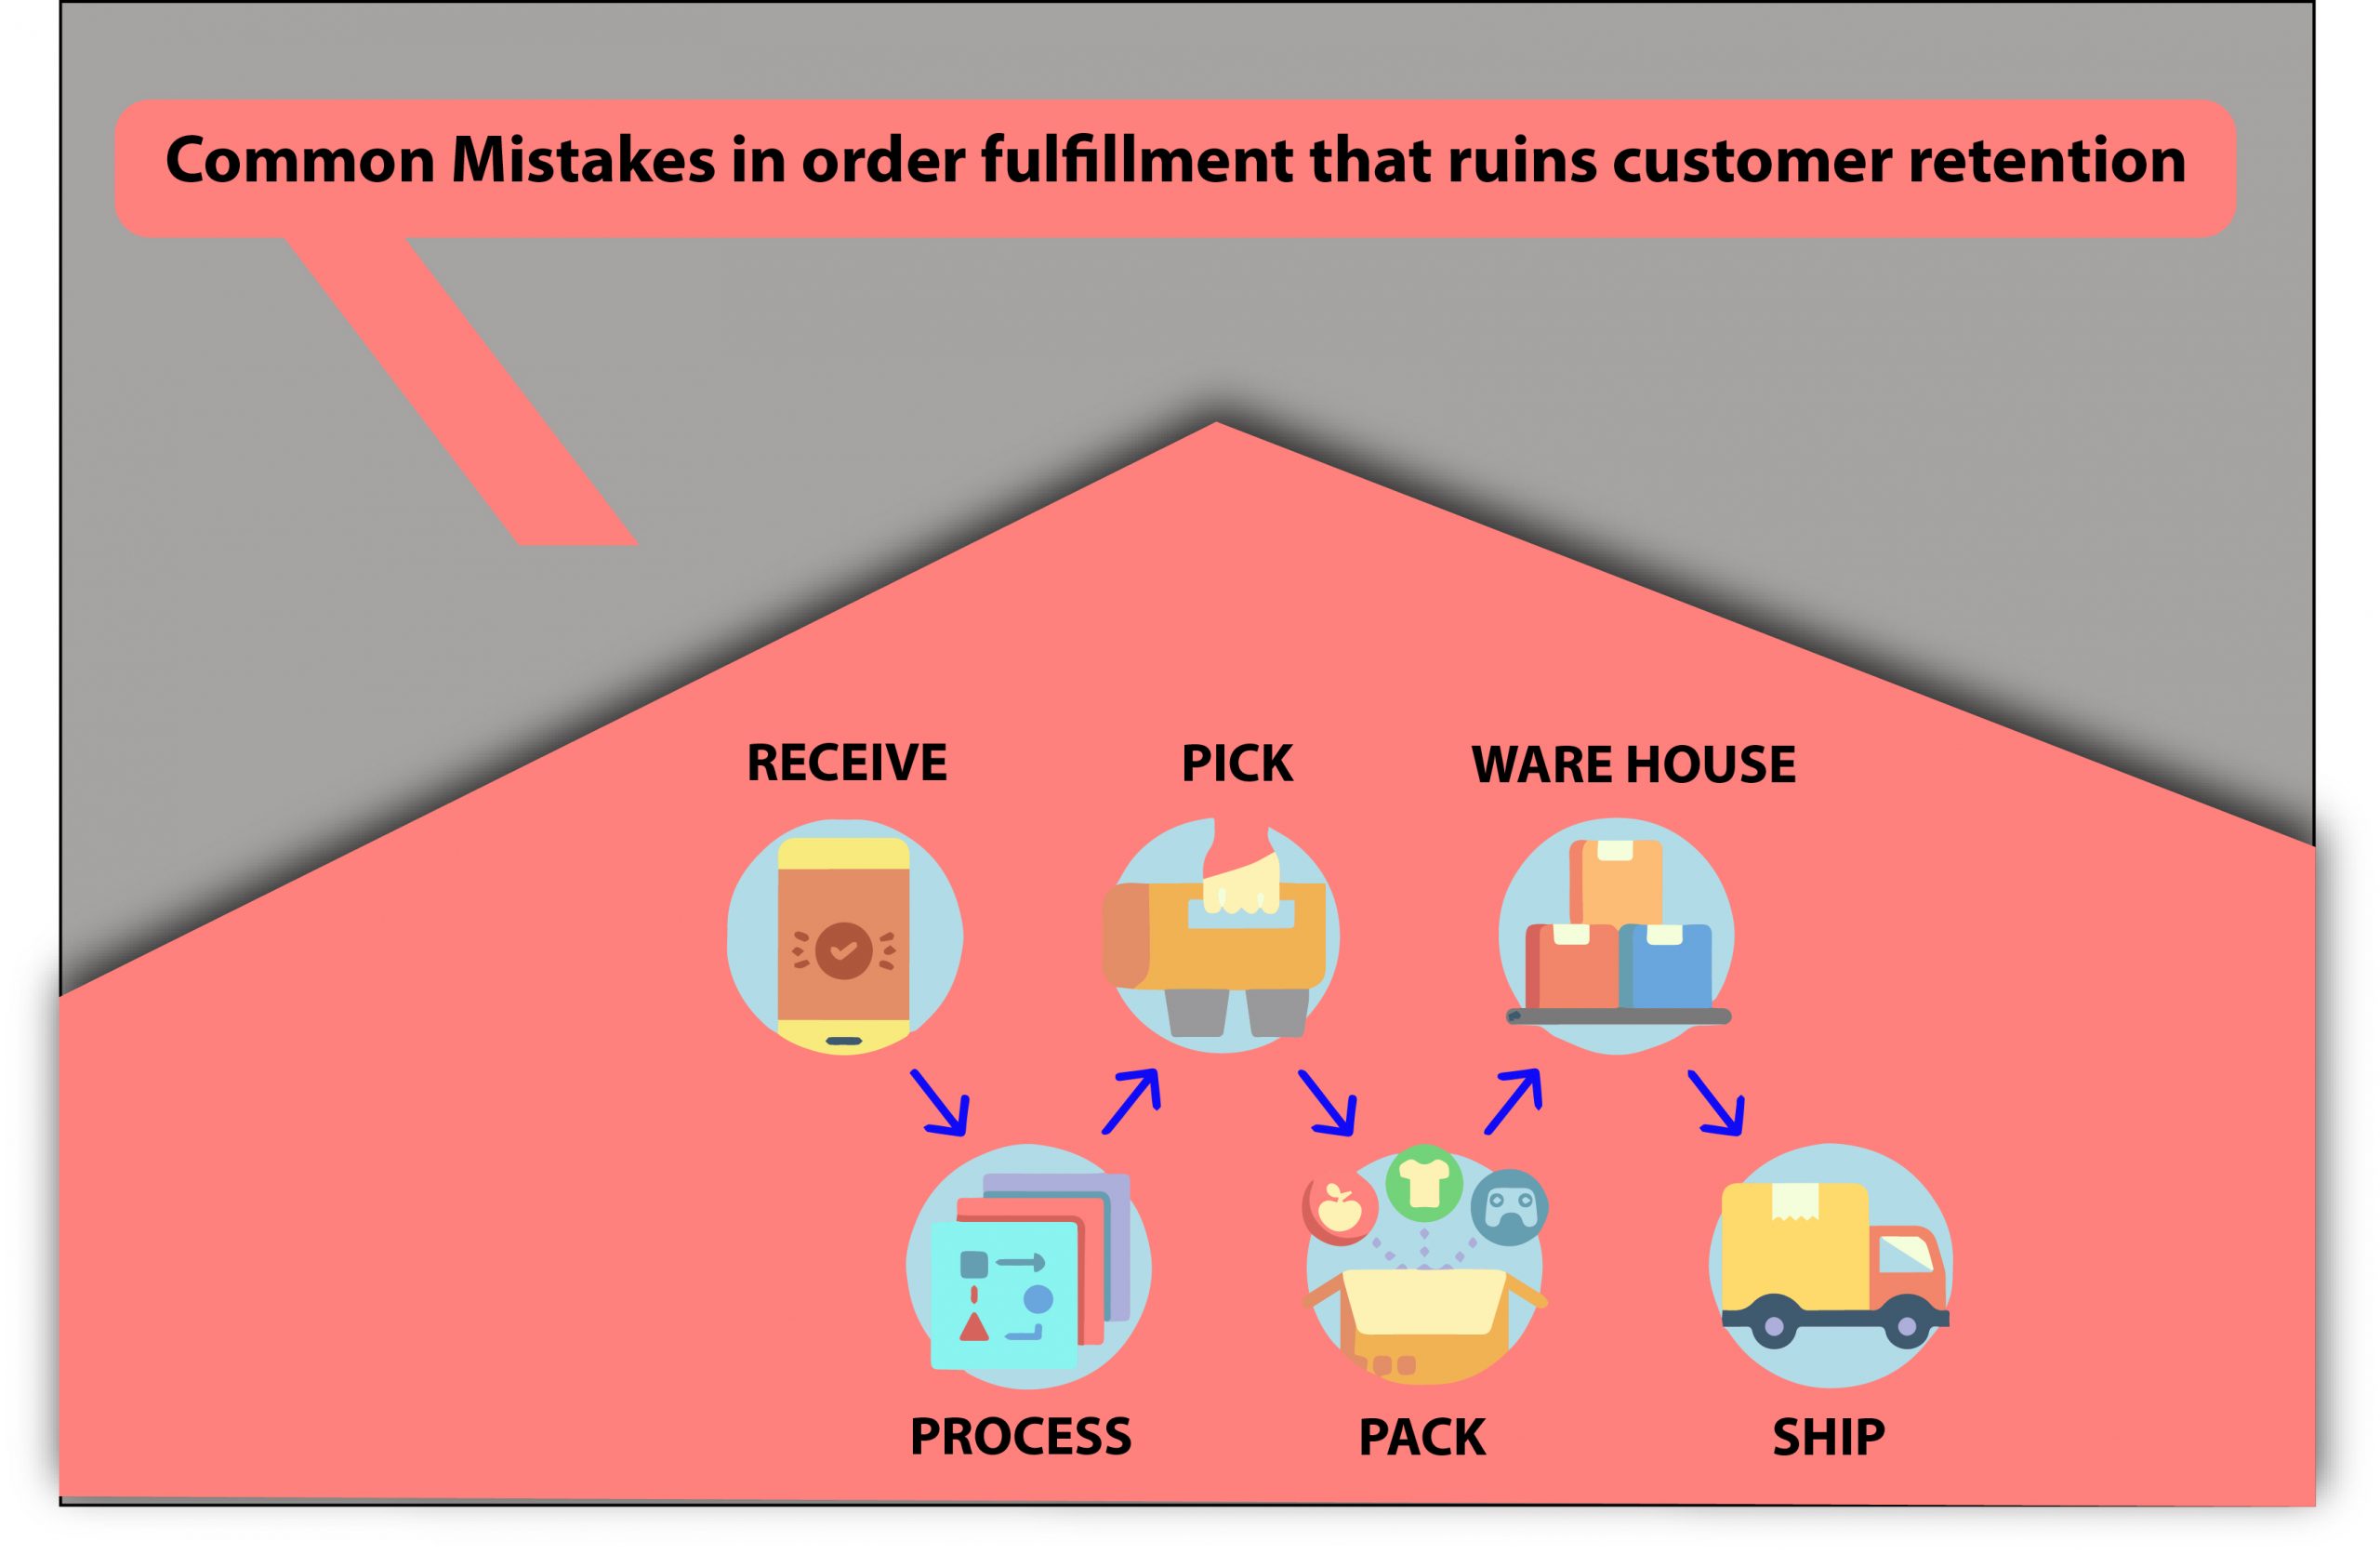 Common Mistakes in order fulfillment that ruins customer retention